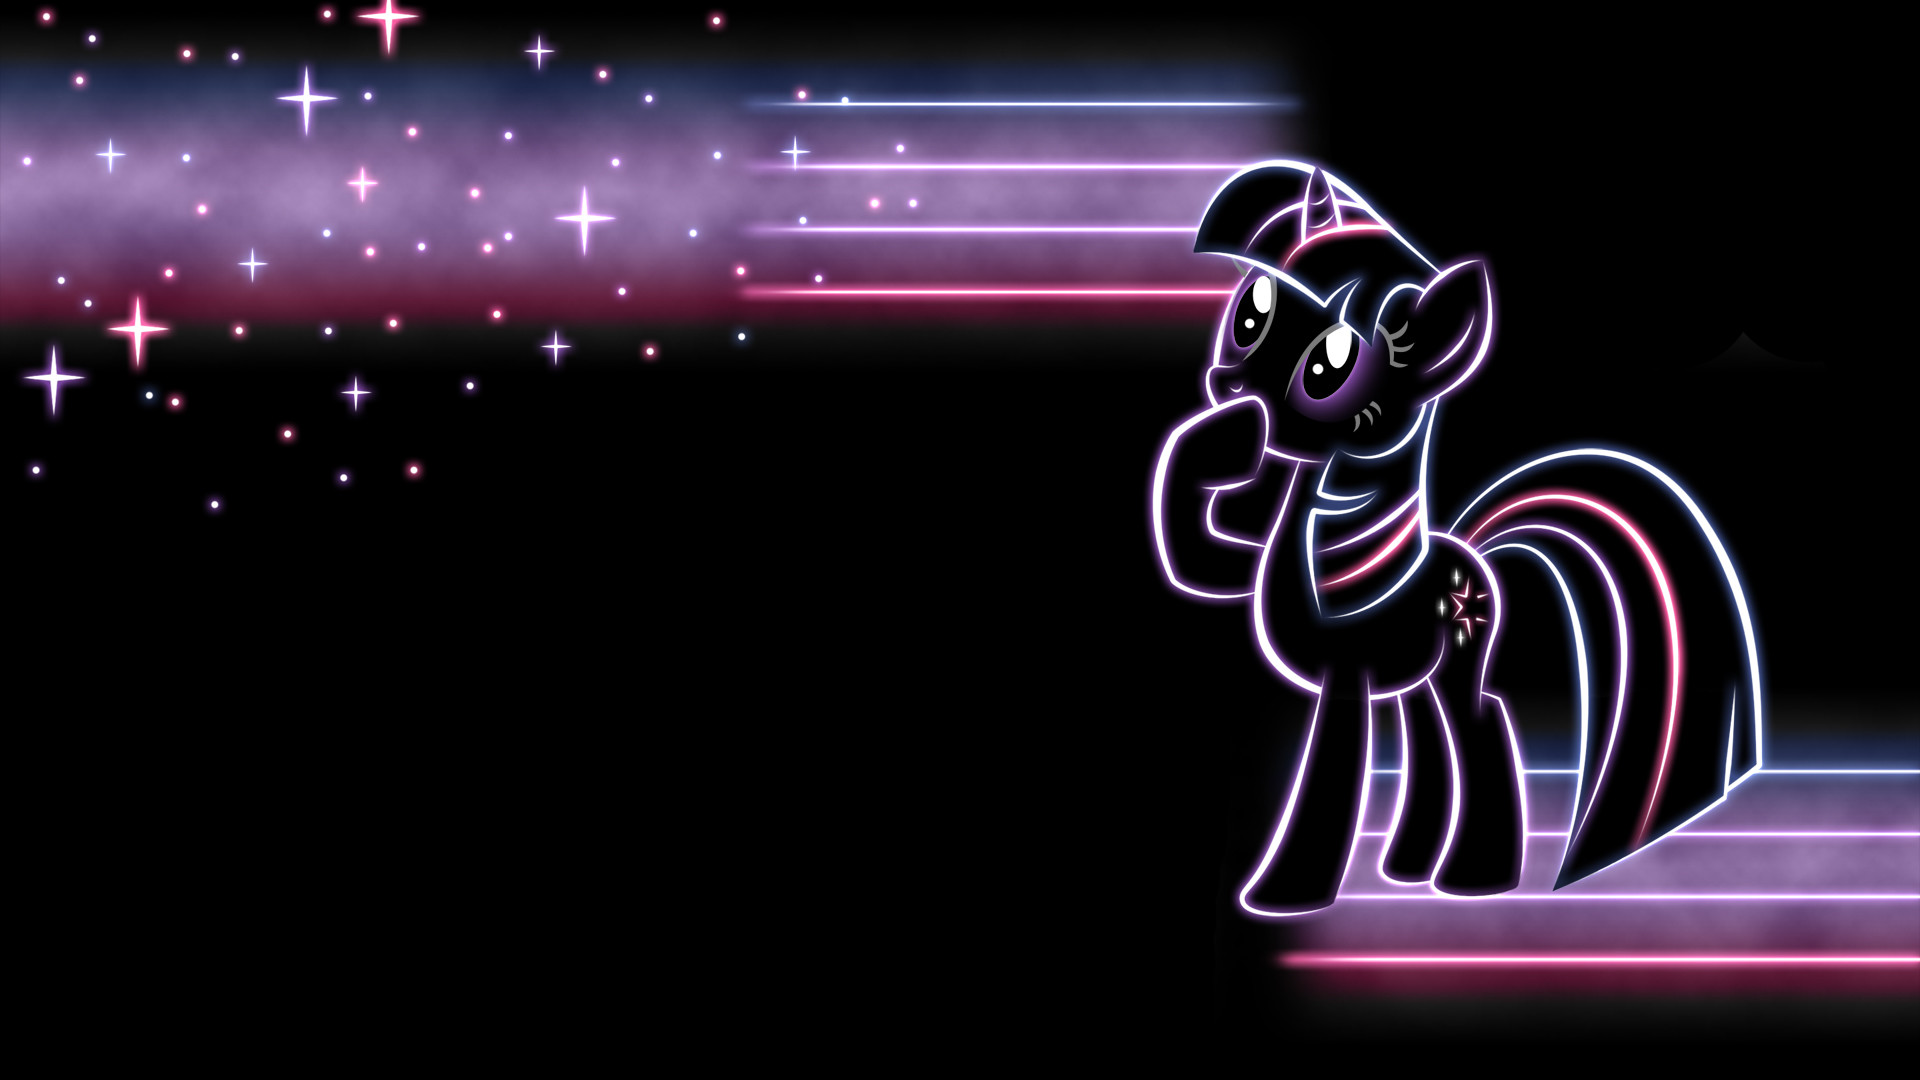 1920x1080 My Little Pony Friendship is Magic images MLP Glow Wallpapers HD wallpaper  and background photos